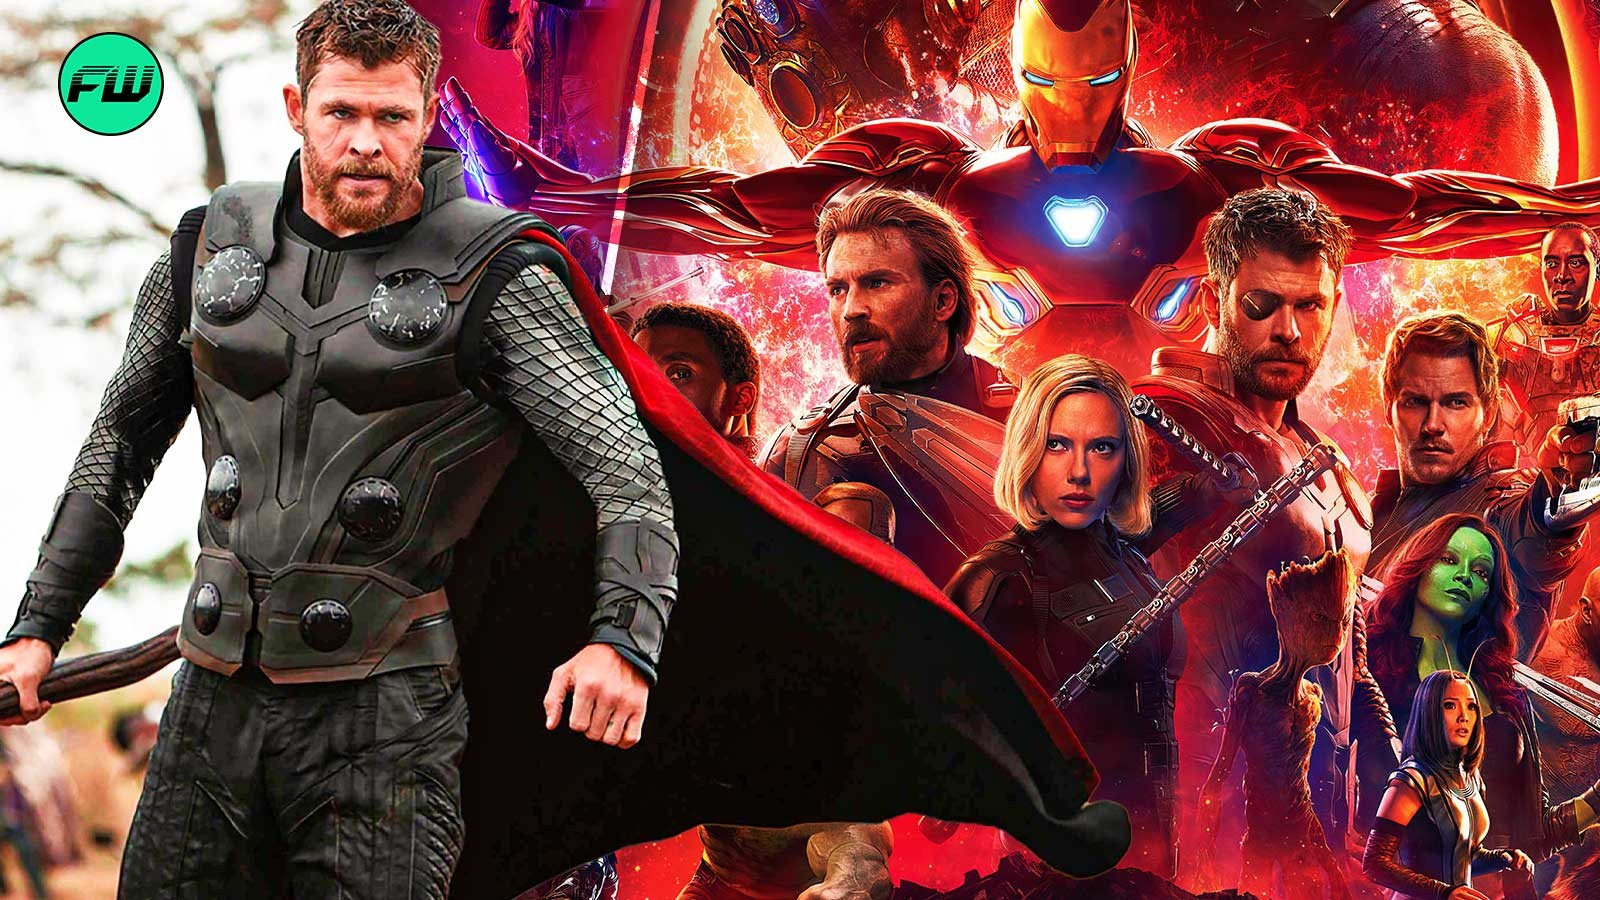 In an abandoned R-rated scene from Infinity War, Chris Hemsworth’s Thor was supposed to do the most inhumane thing to children